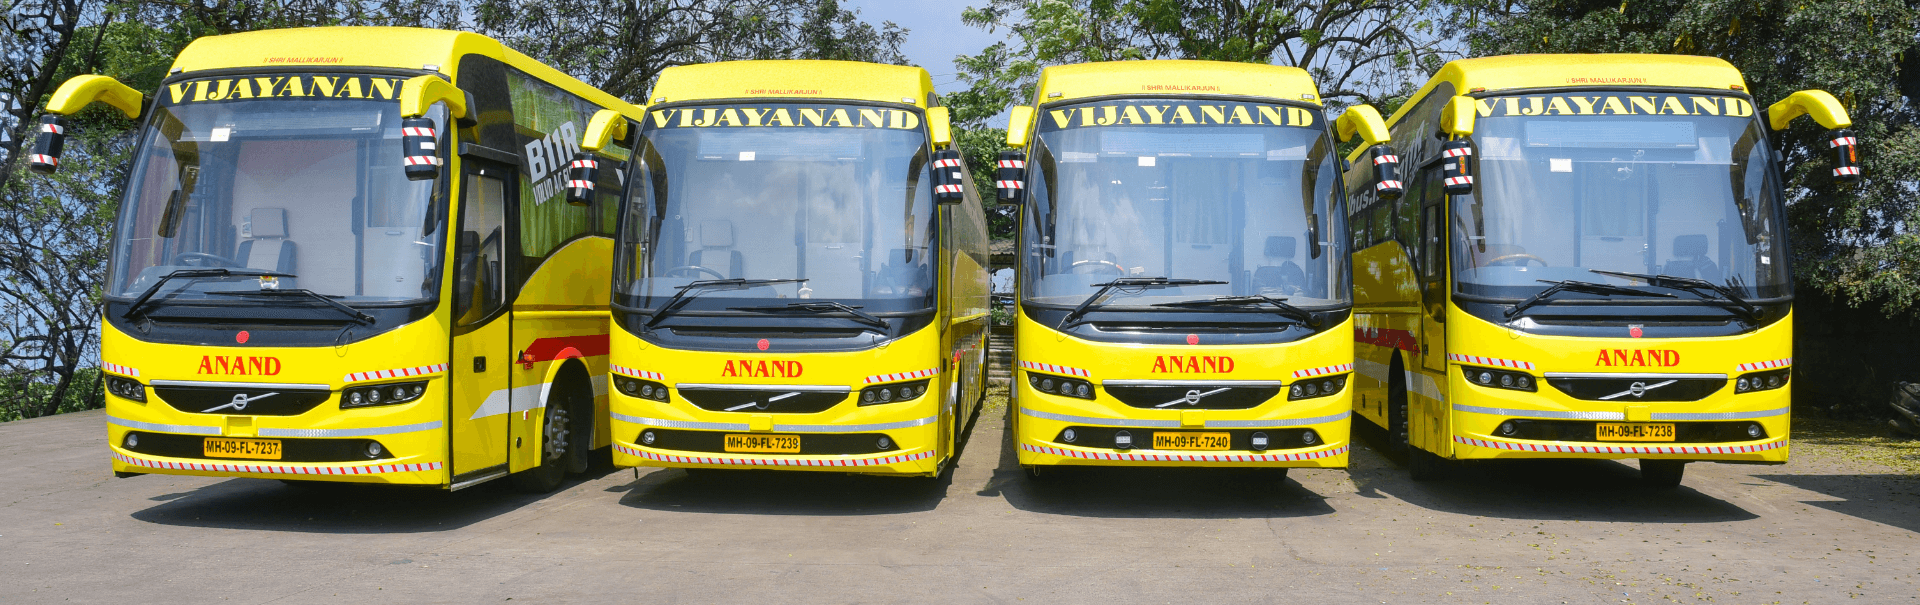 Vijayanand Travels Private Ltd | ONLINE BUS TICKET BOOKINGS & TRAVEL  SERVICES